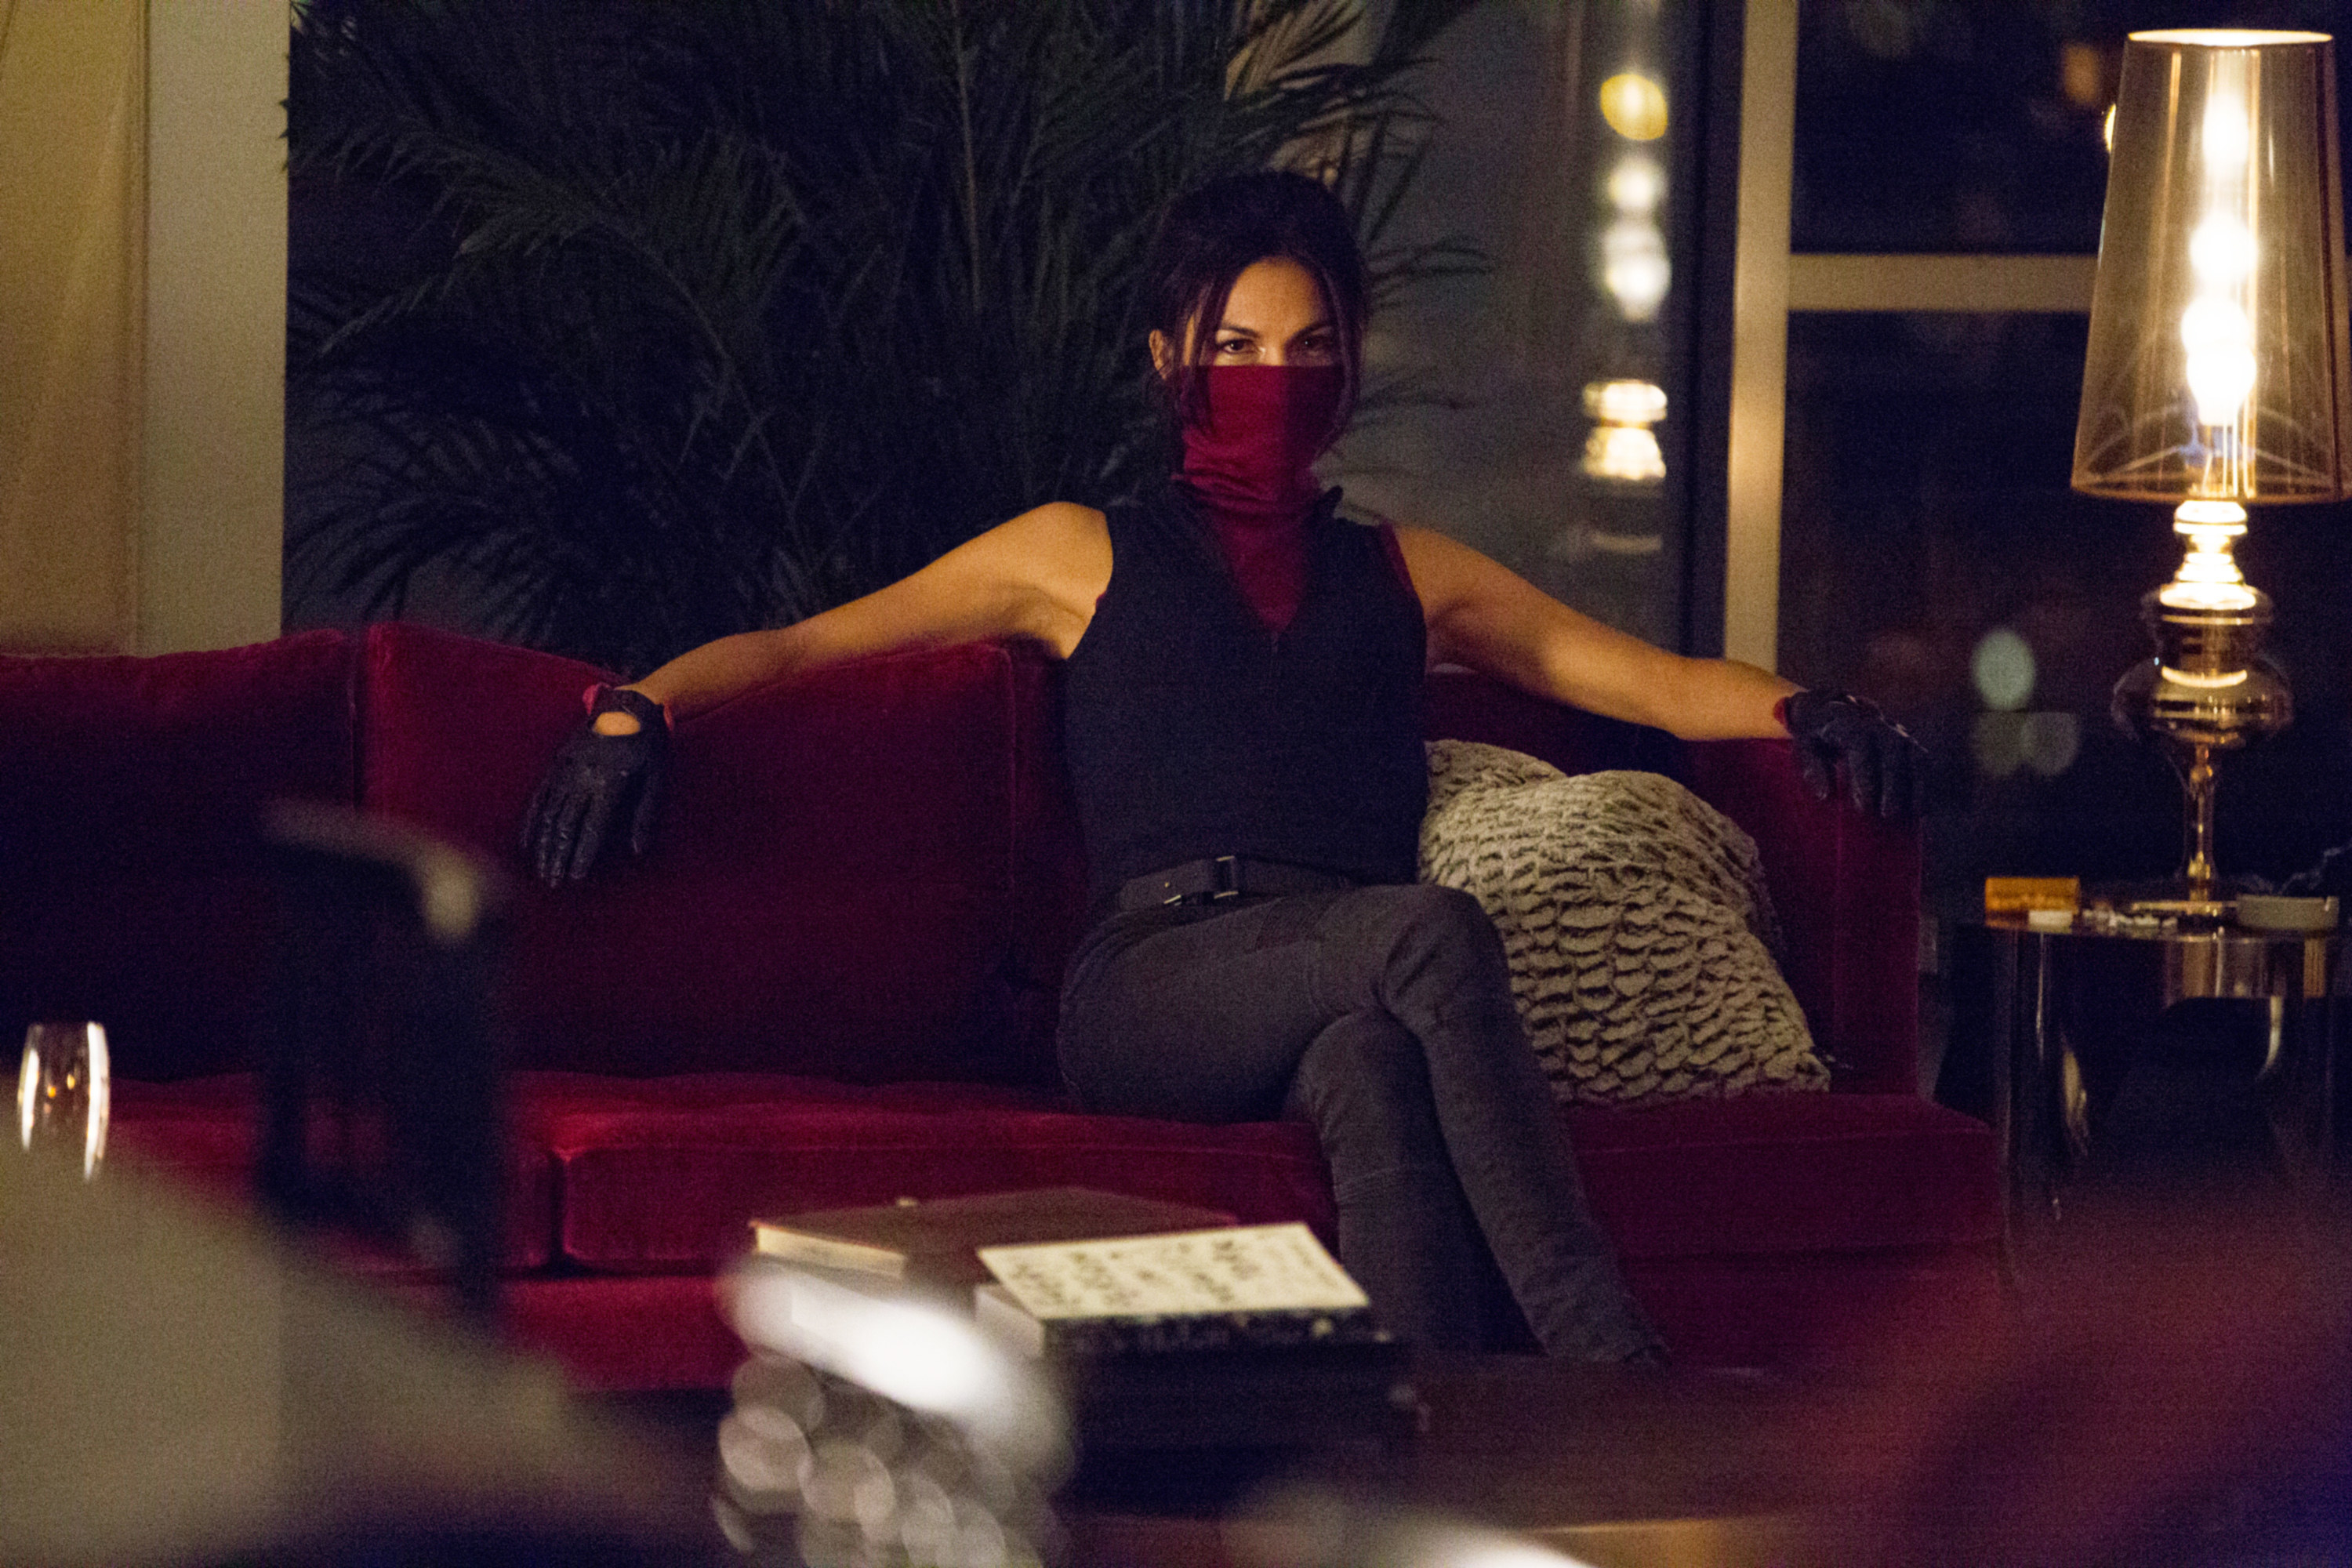 wearing a face covering, Elektra stretches her arm across the couch, waiting